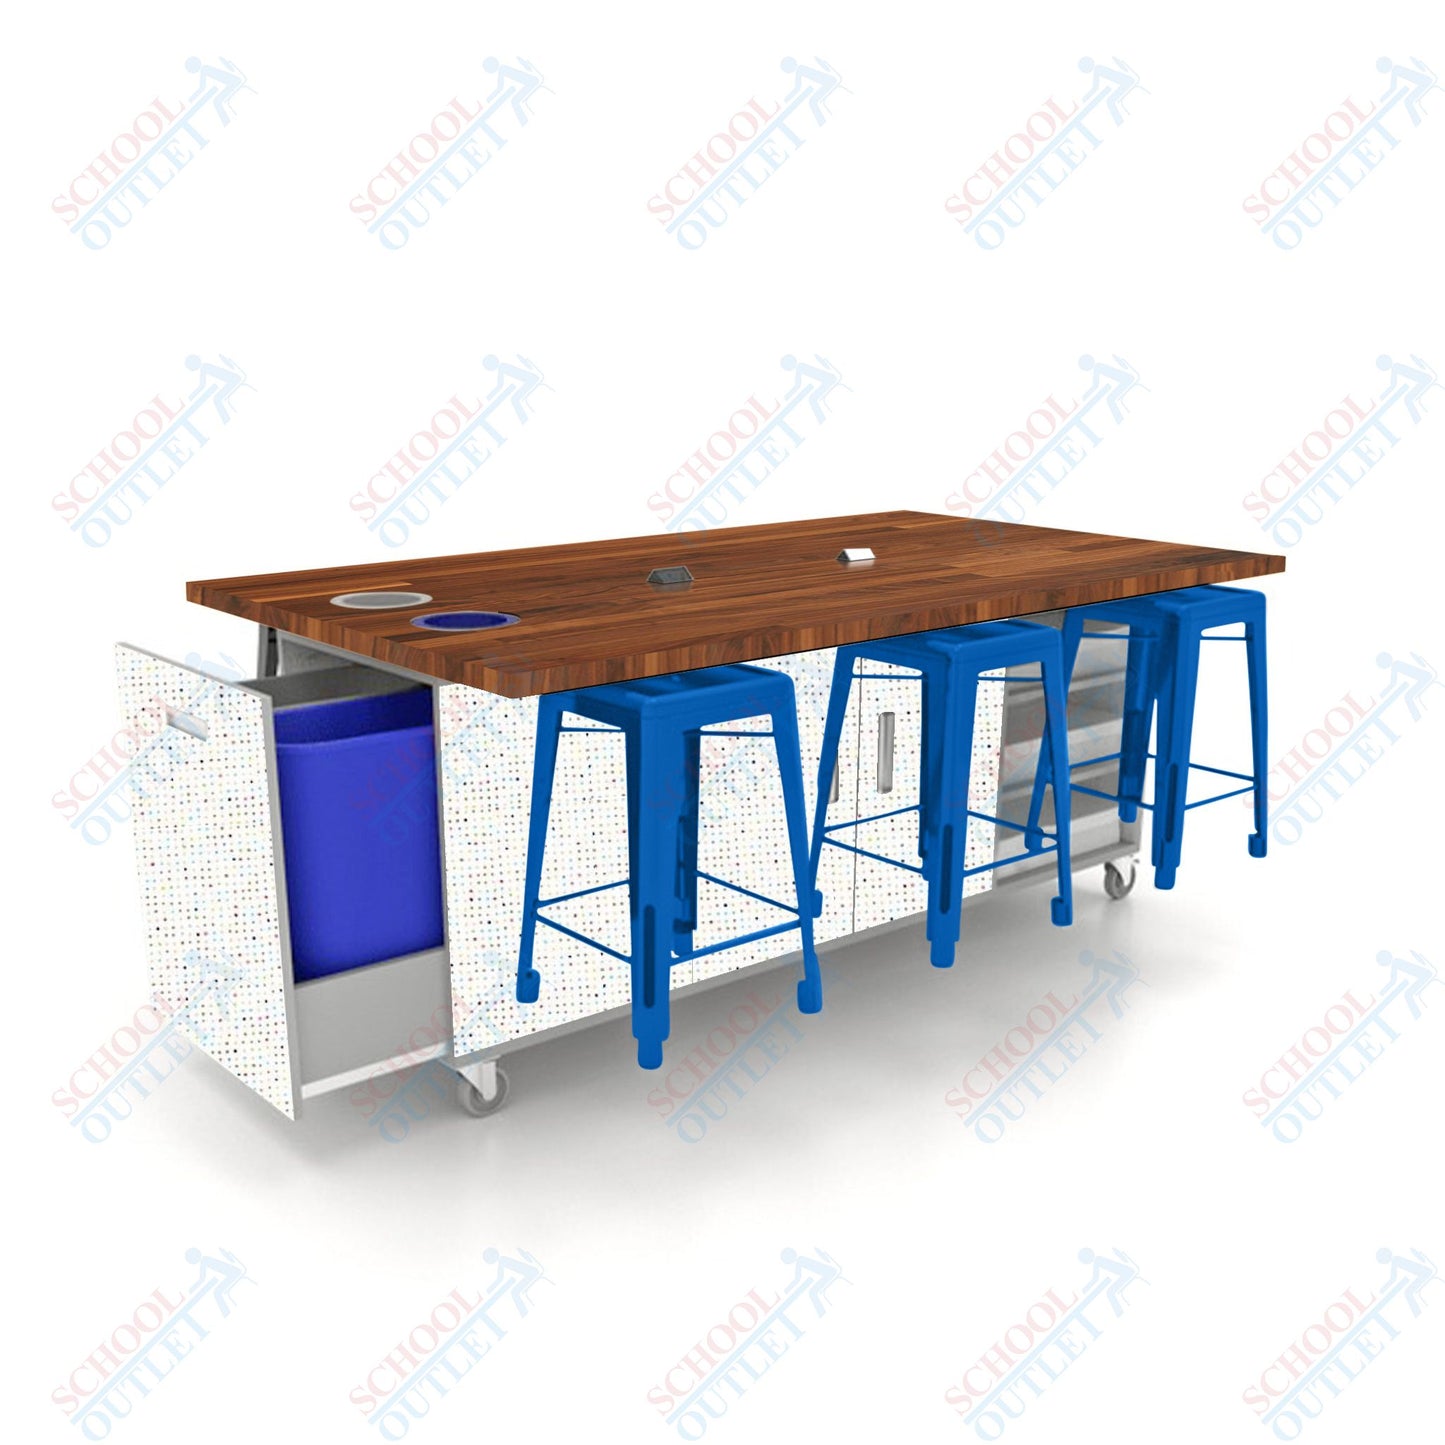 CEF ED Original Table 36"H Butcher Block Top, Laminate Base with  6 Stools, Storage Bins, Trash Bins, and Electrical Outlets Included.